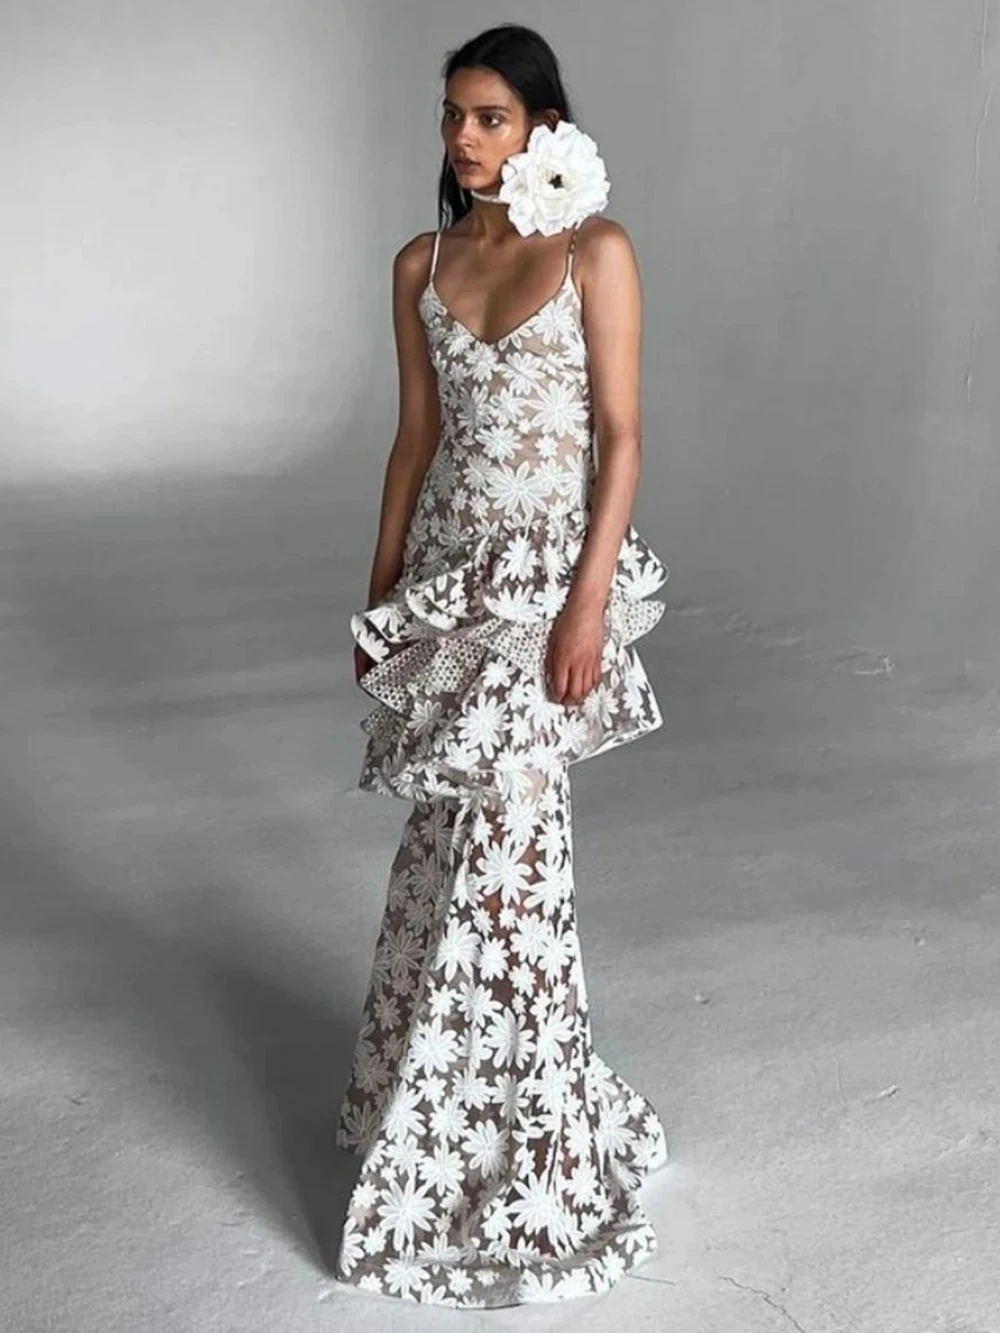 

Sexy Sleeveless Floral Tiered Ruffle Lace Slim Maxi Dress With Choker Women Elegant Printed Vintage Evening Party Wedding Dress